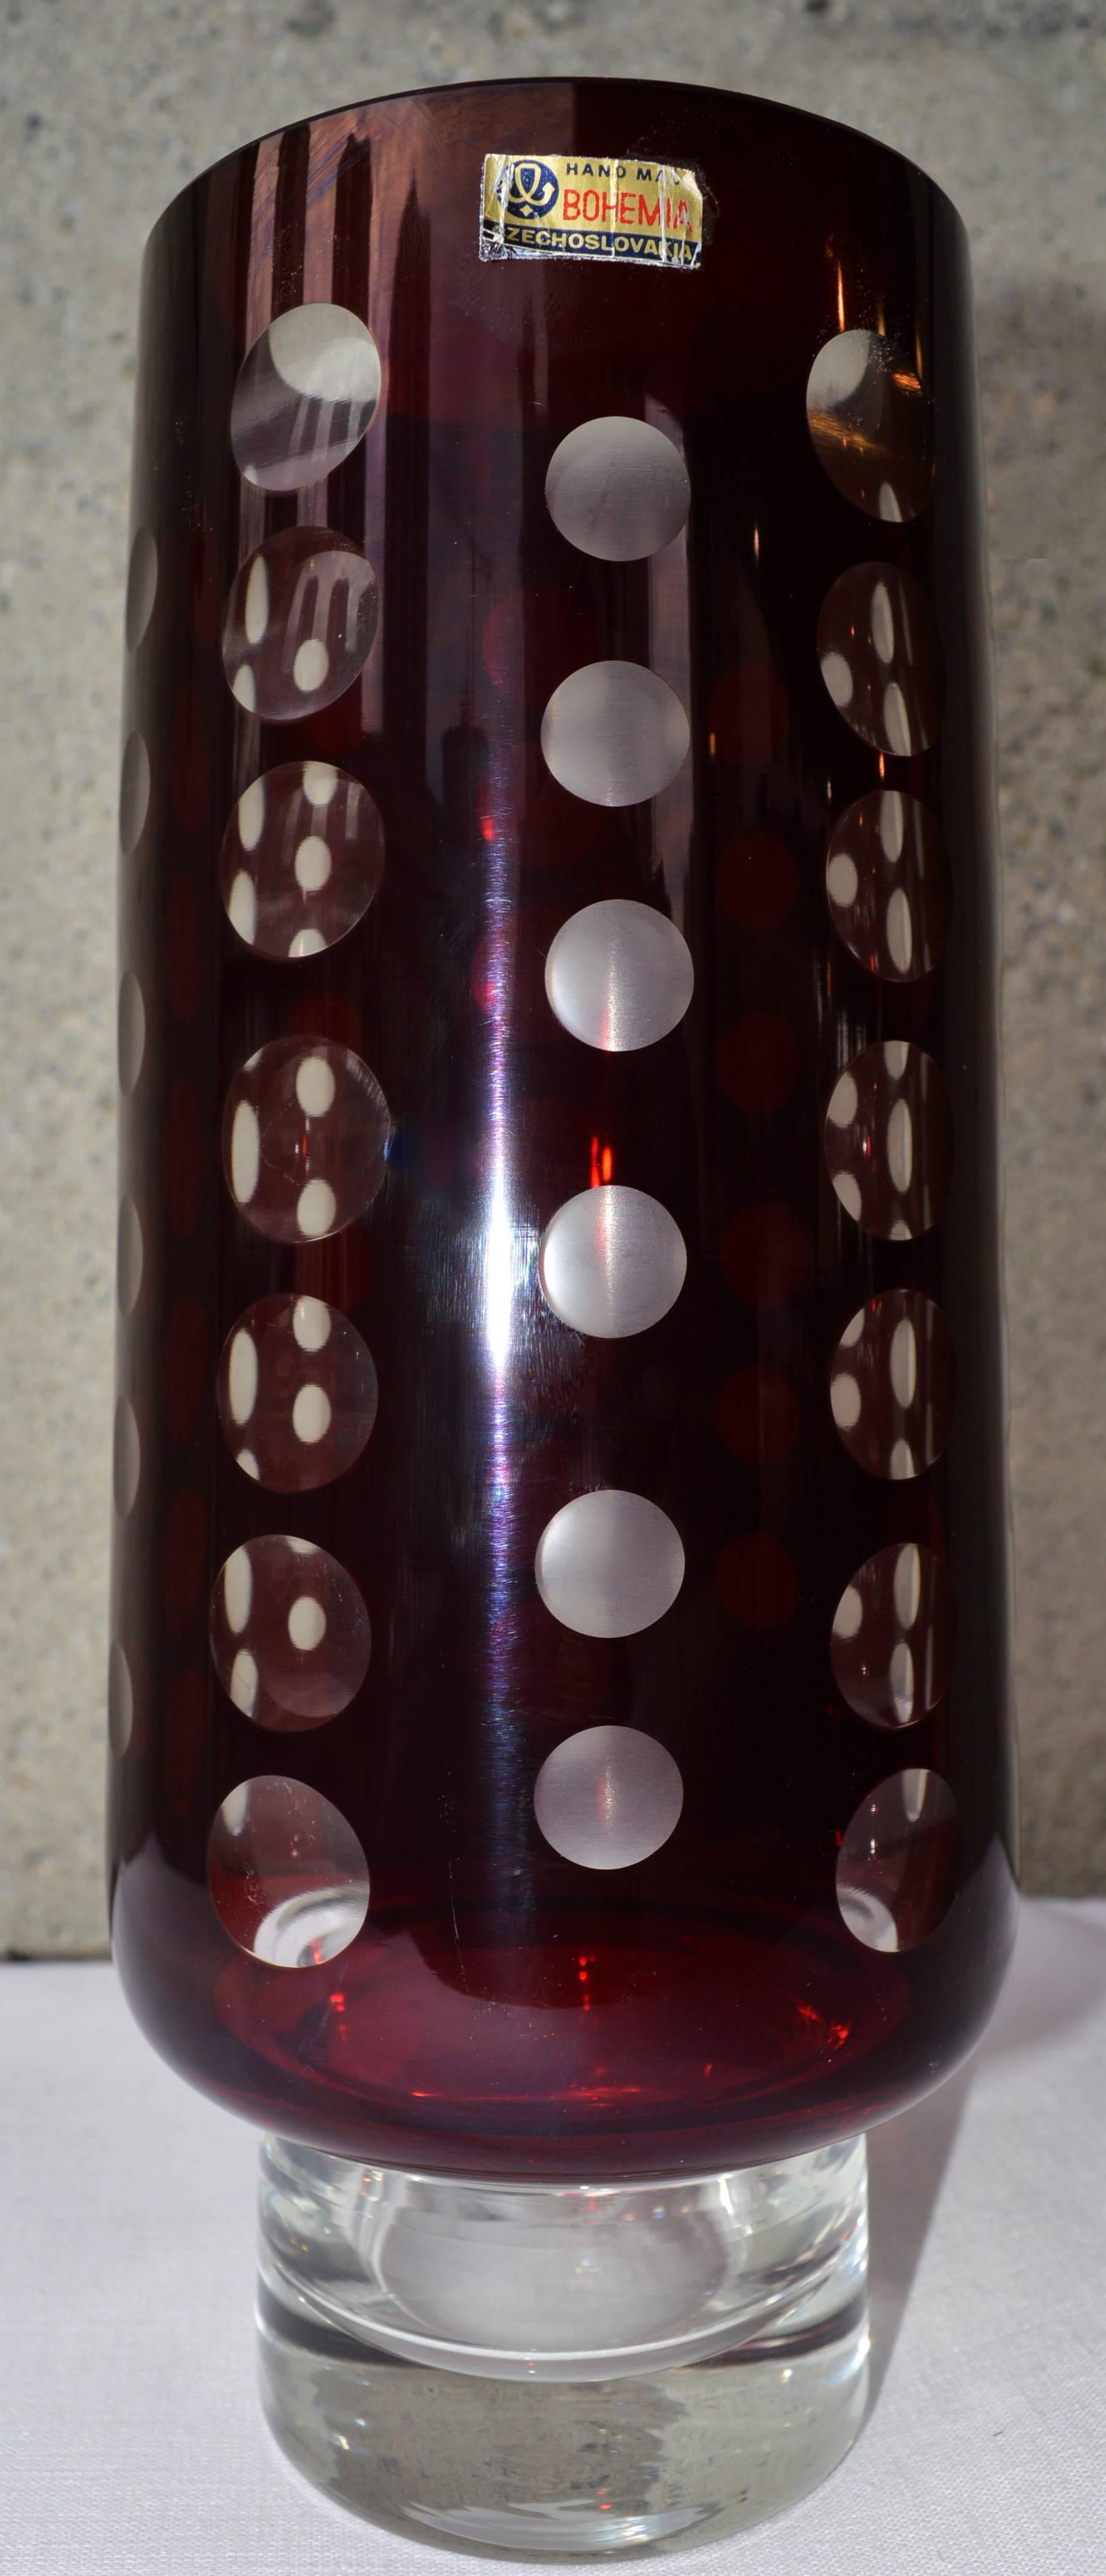 This stunning handmade vintage Czech Bohemia glass vase is a rich burgundy glass cased in white. The artisans cut-away discs out of the red, to create apertures to view through which create beautiful optical illusions. In this vase, clear circles